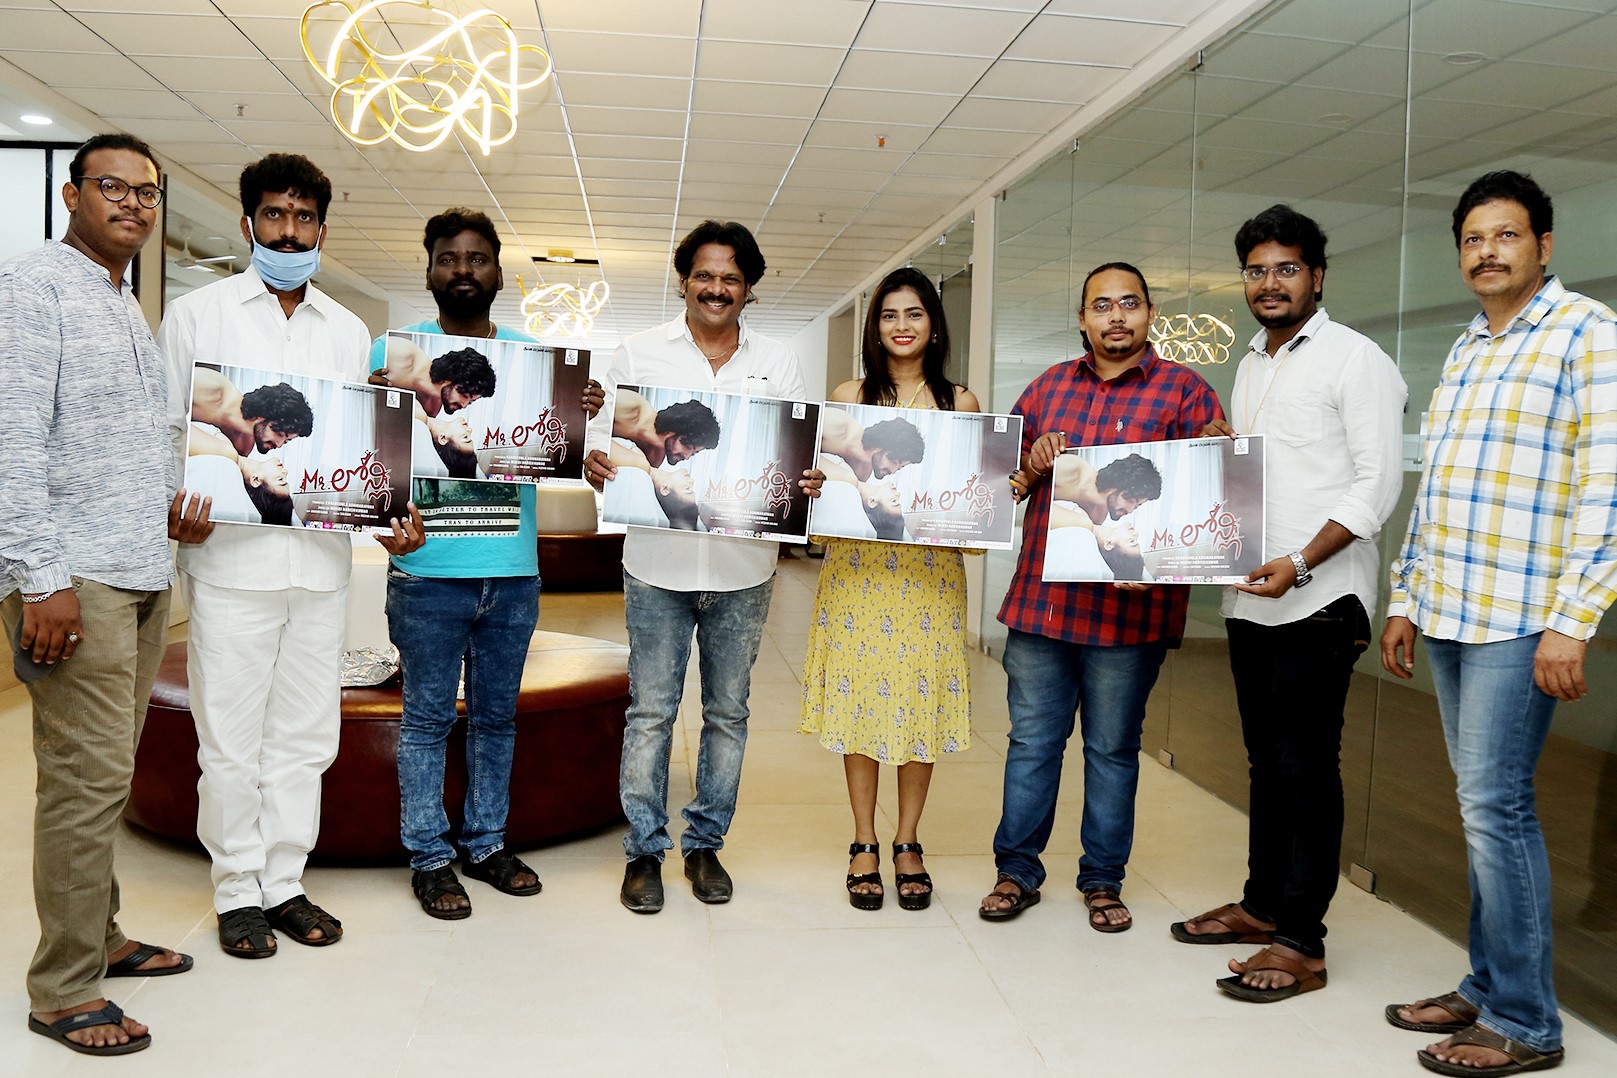 Mister Lonely Poster launched by MVV Satyanarayana